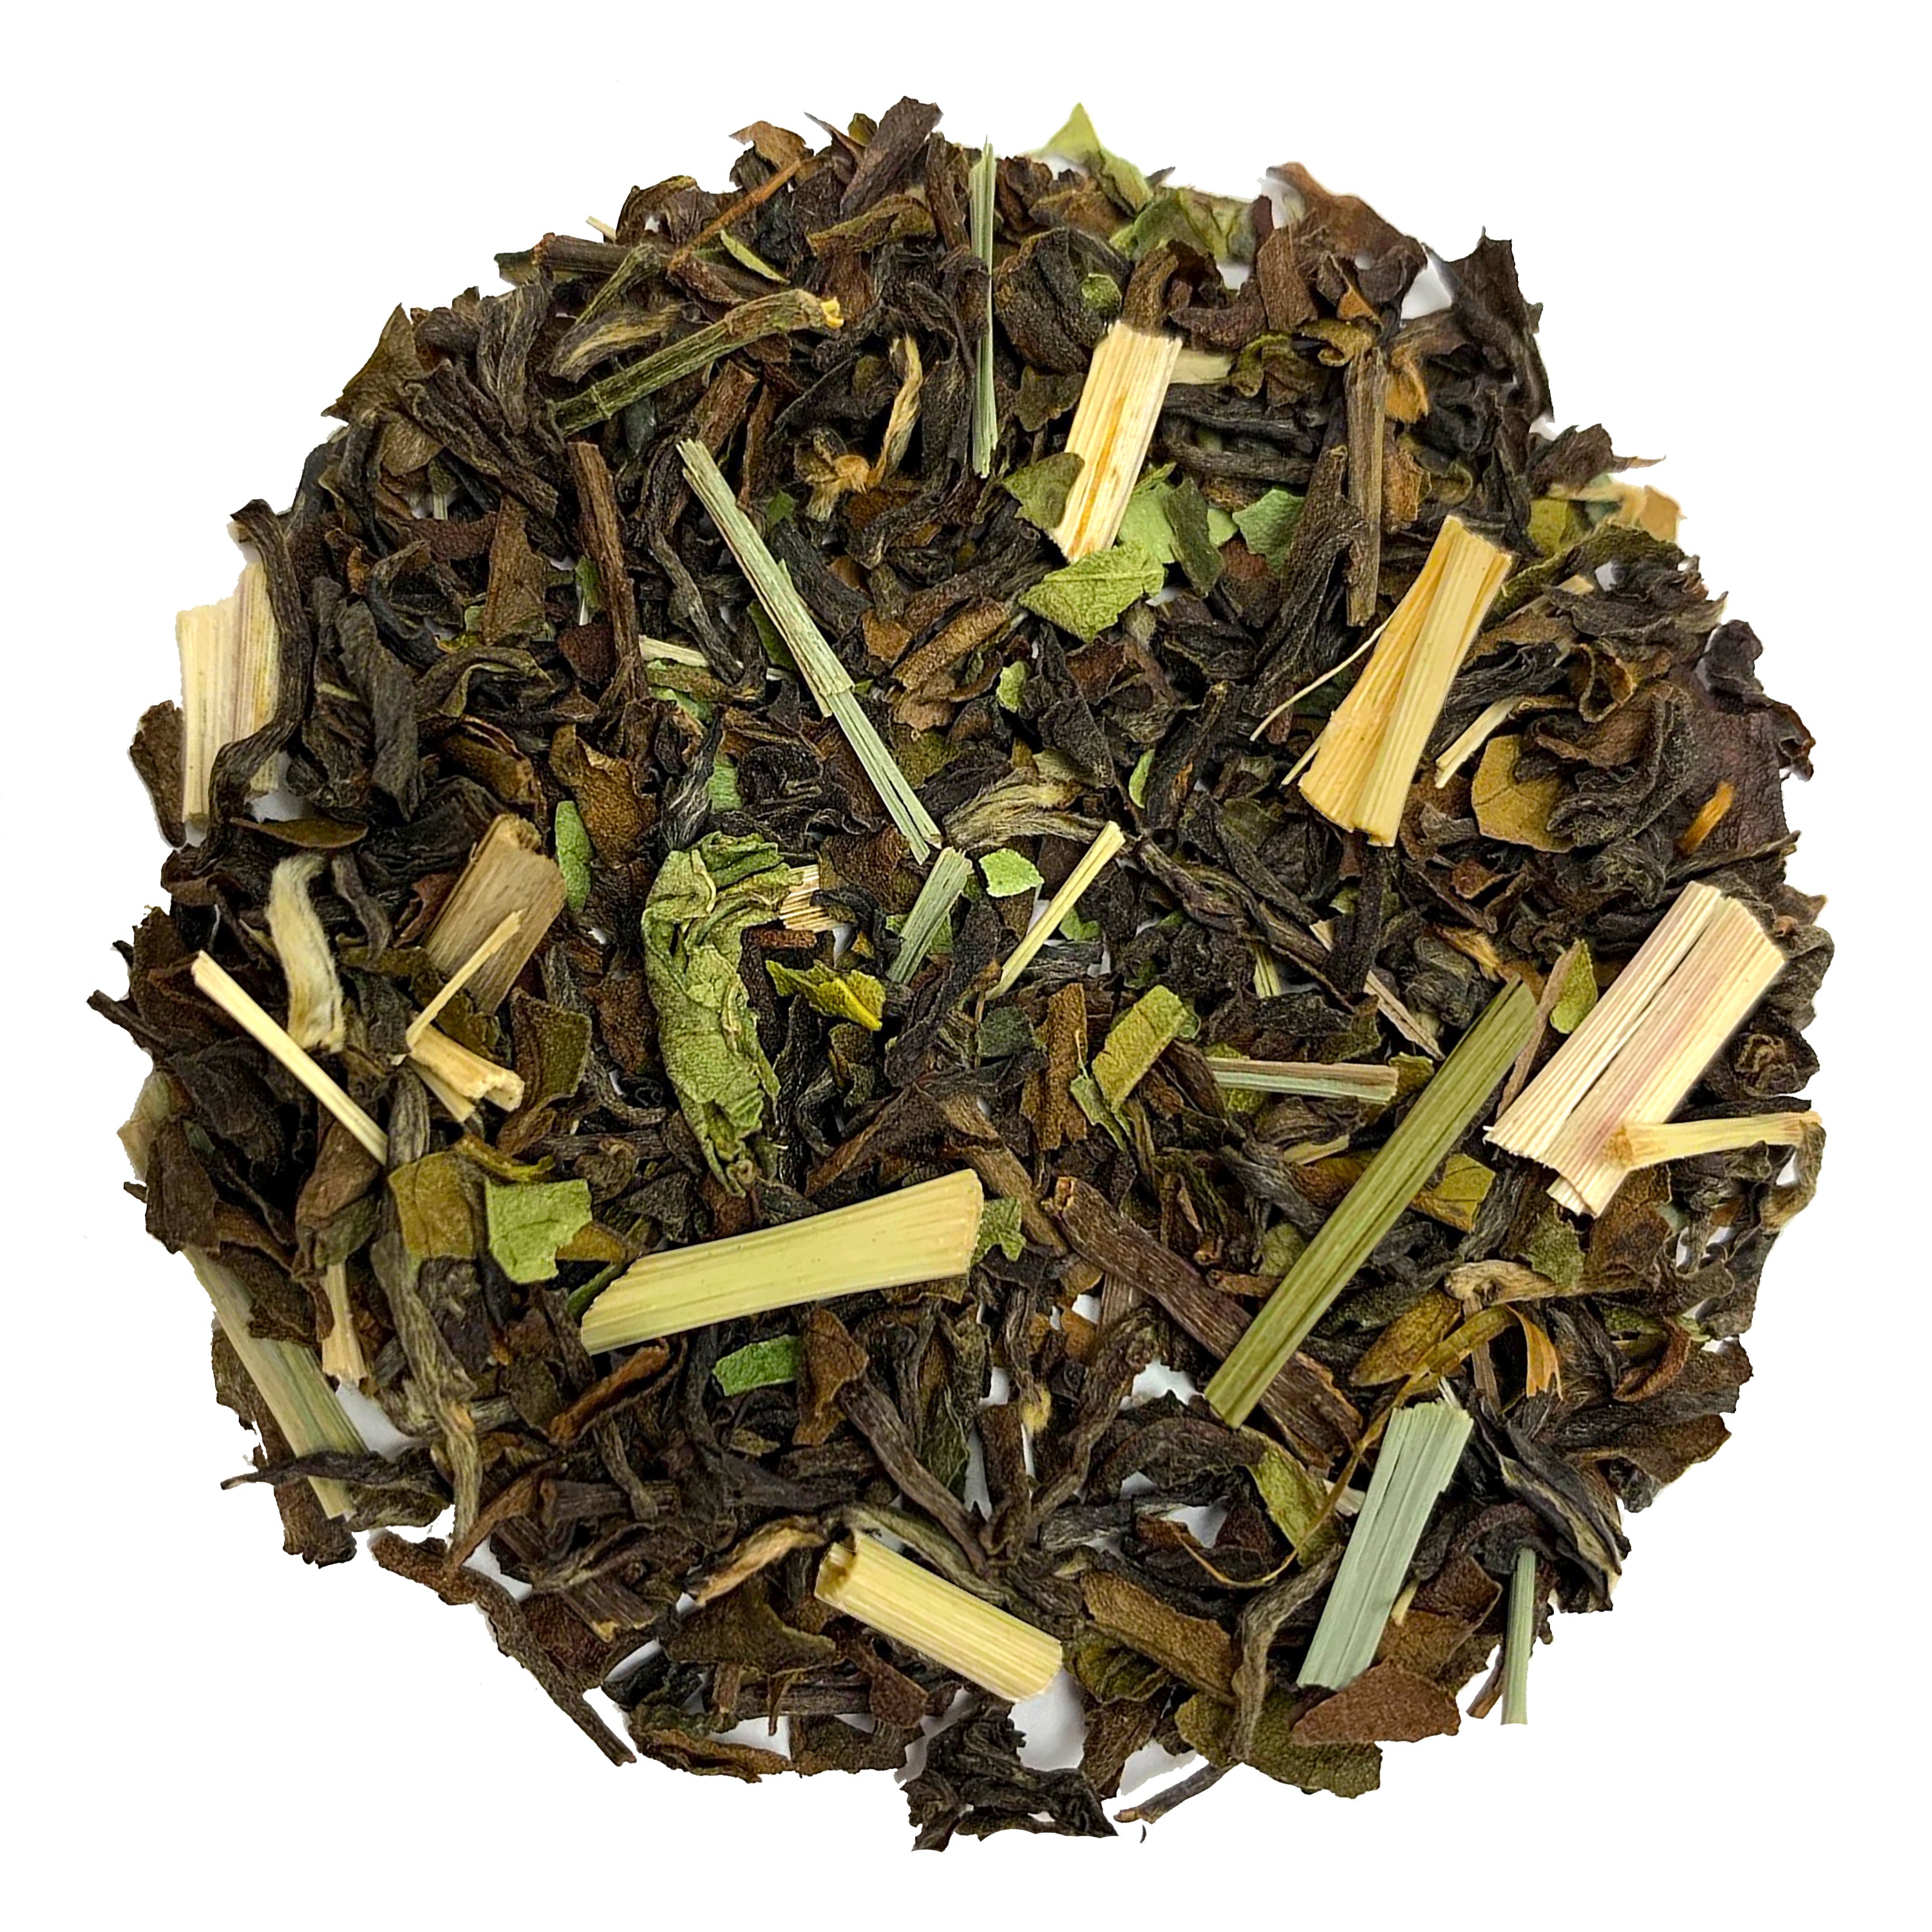 Tea with lemongrass, and a little tasty bark of citrus. Ilam black tea scented with spices and rare herbs. Excellent, a creamy and original scent.